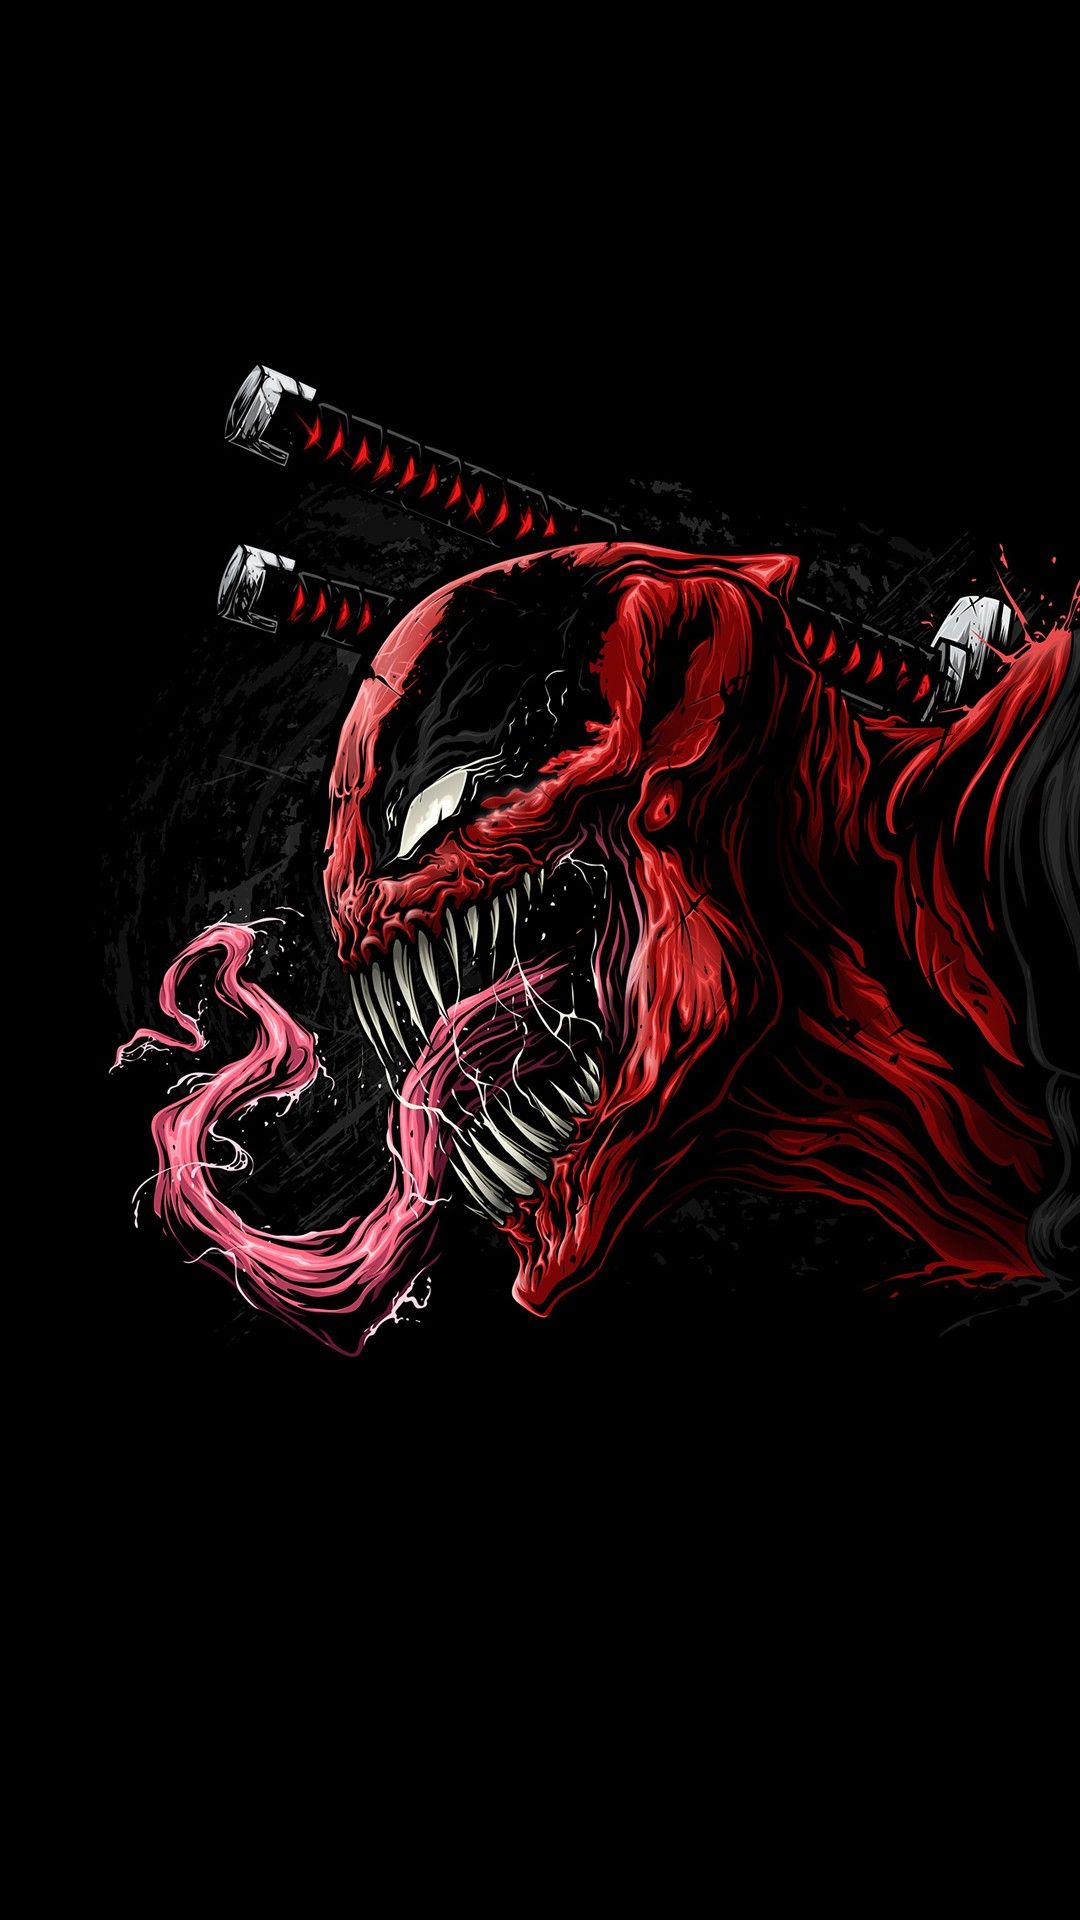 Venom Abstract  Android iPhone Desktop HD Backgrounds  Wallpapers  1080p 4k 100170 hdwallpapers androidw  Marvel wallpaper hd Venom  comics Marvel art